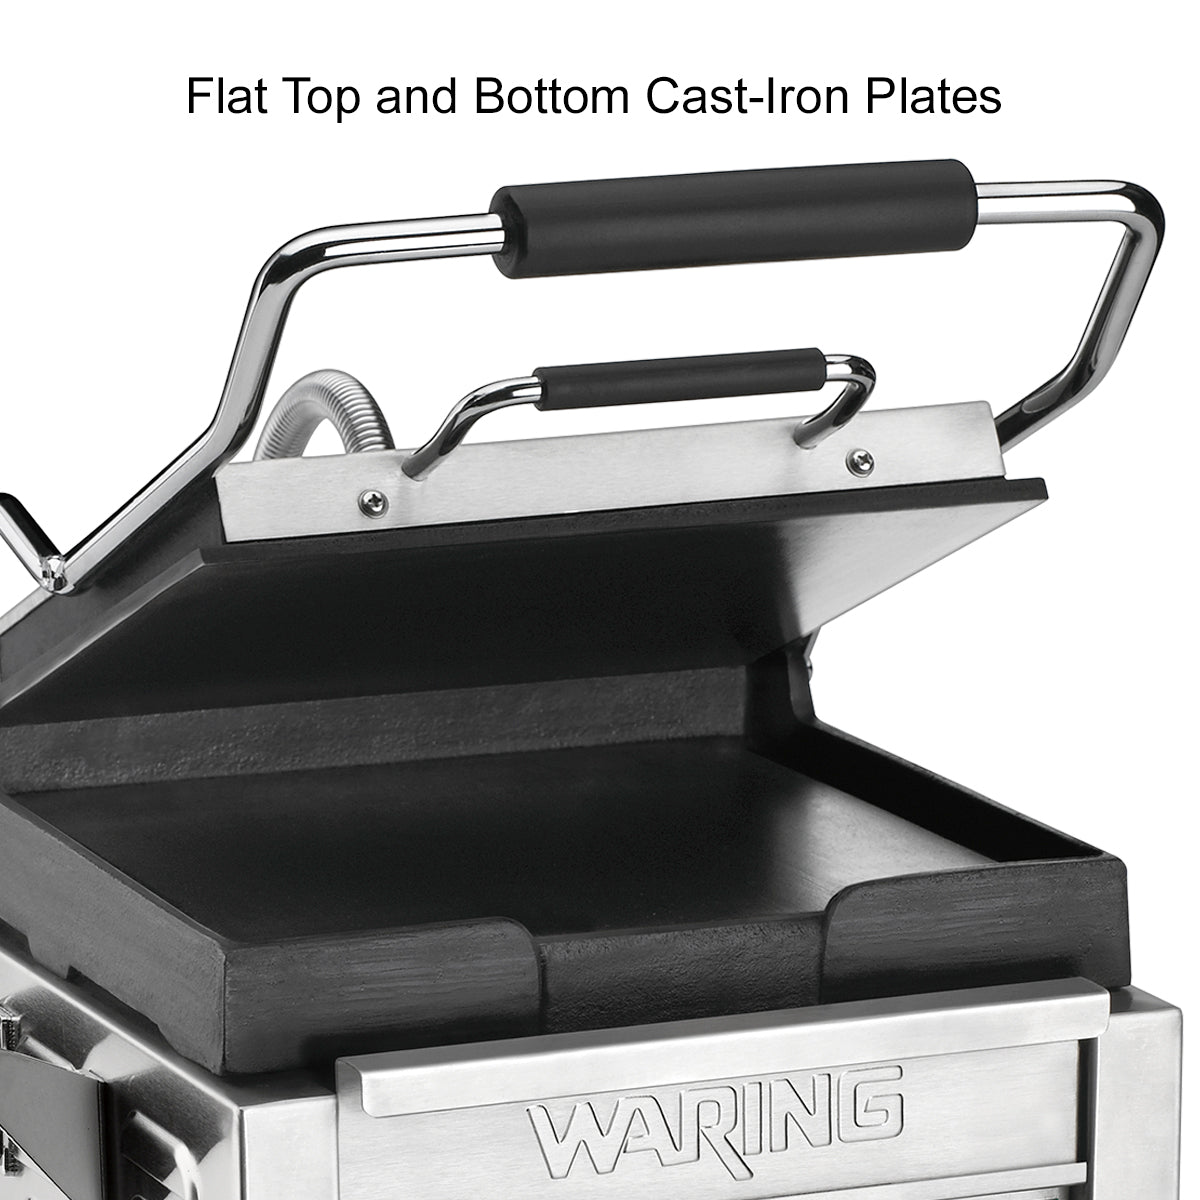 Waring COMPACT ITALIAN-STYLE FLAT GRILL WITH TIMER - 120V  Model: WFG150T